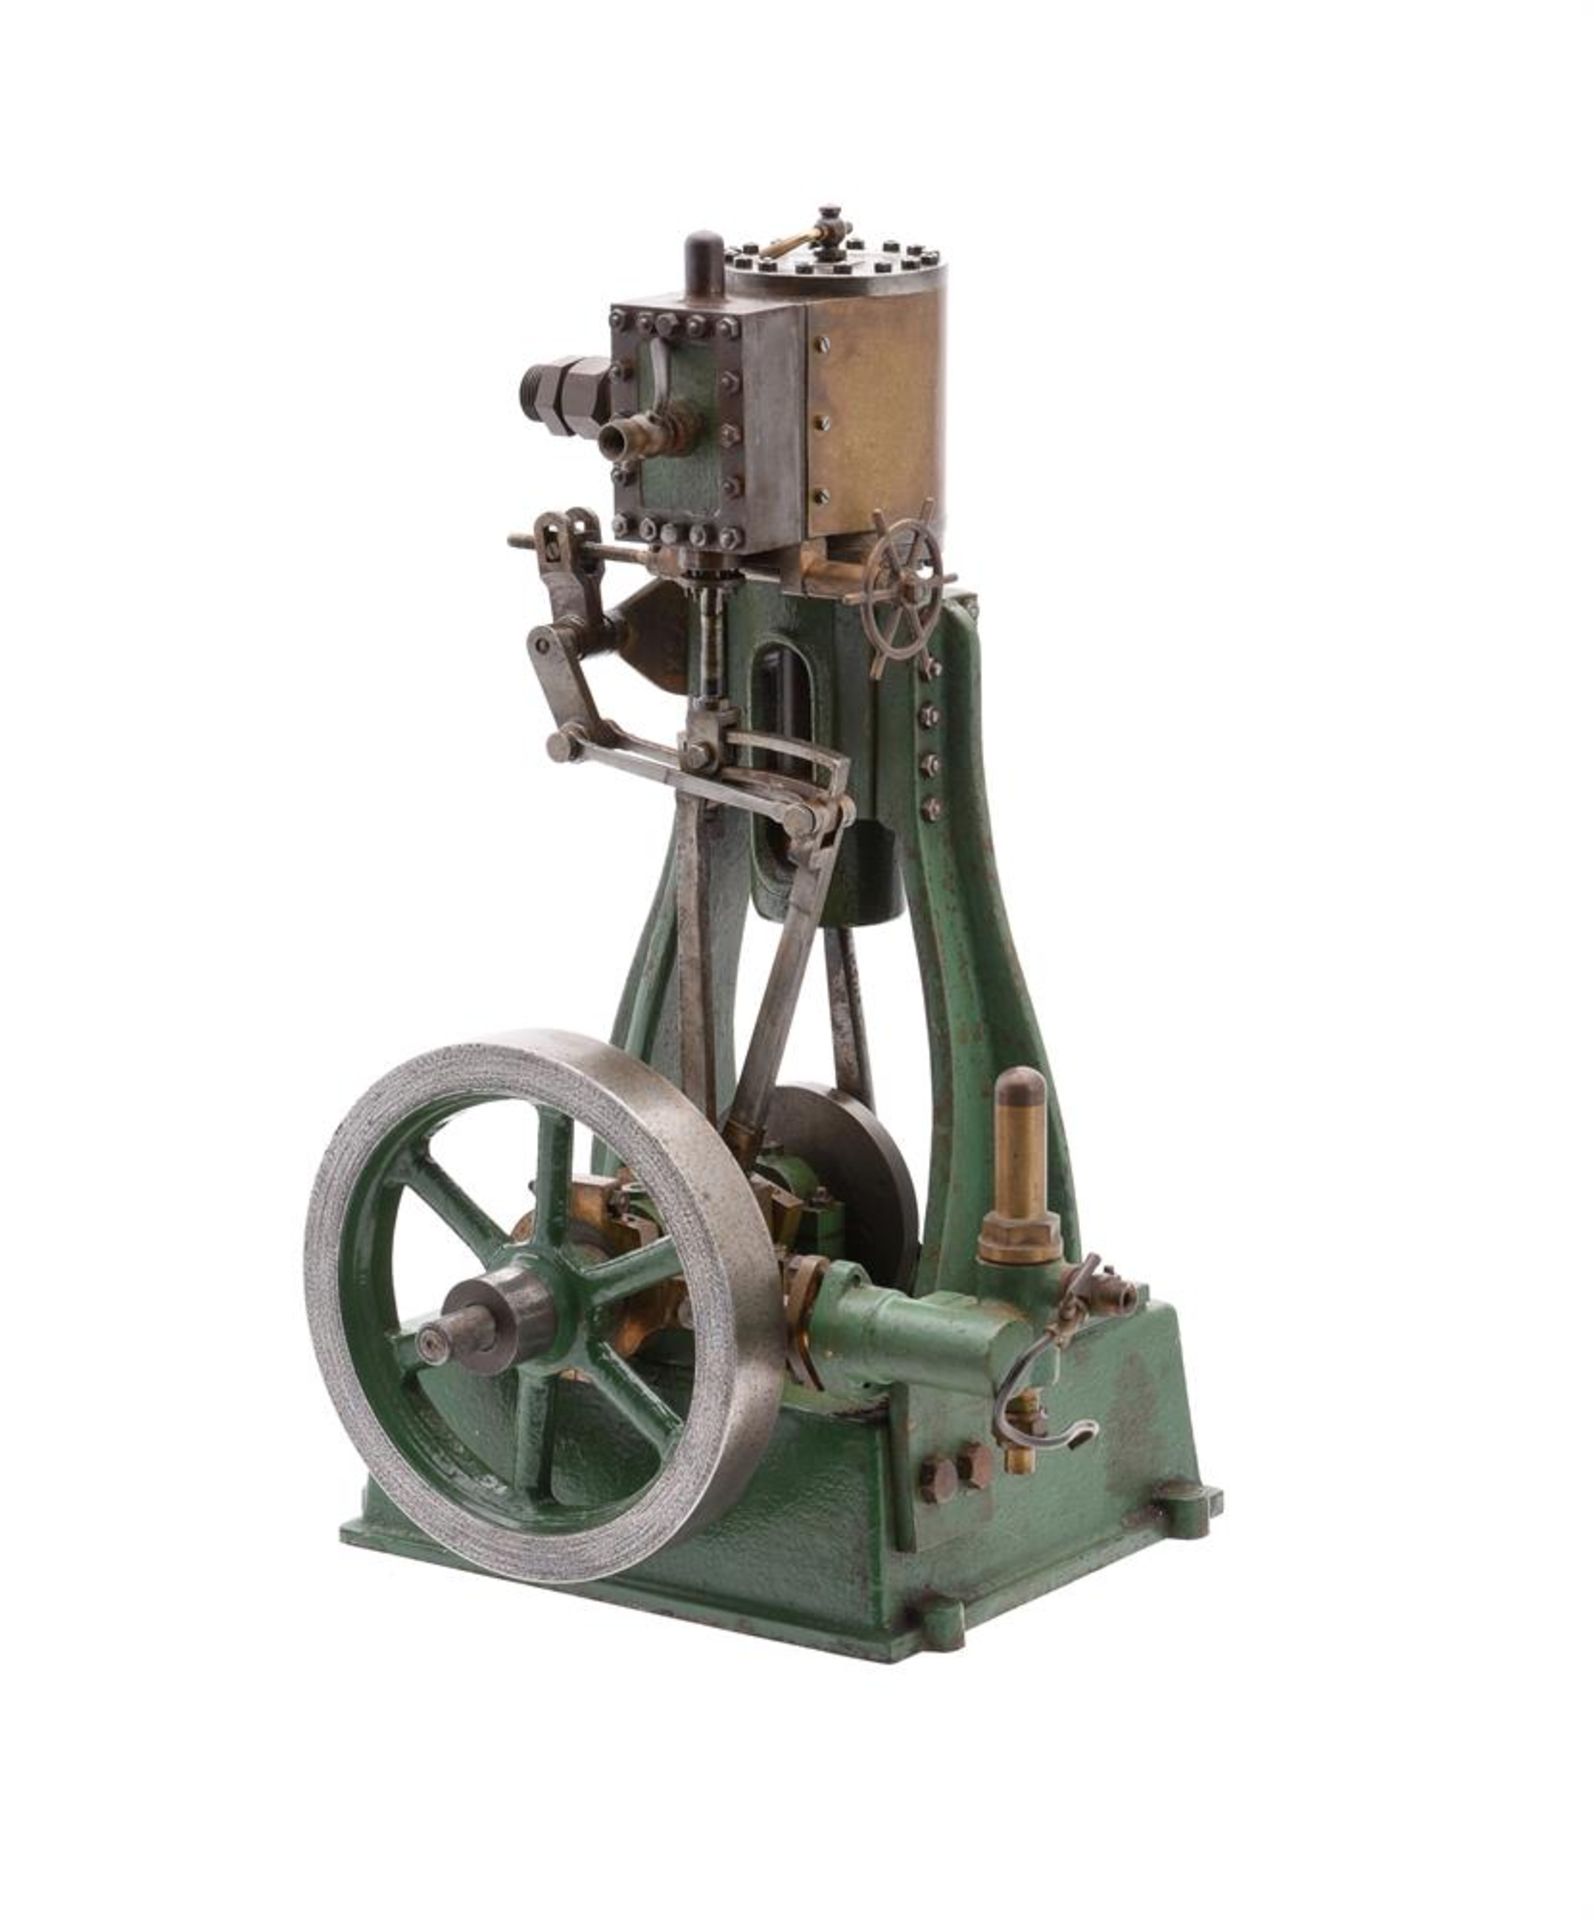 A well-engineered model of a H Clarkson & Son of York vertical single cylinder steam engine